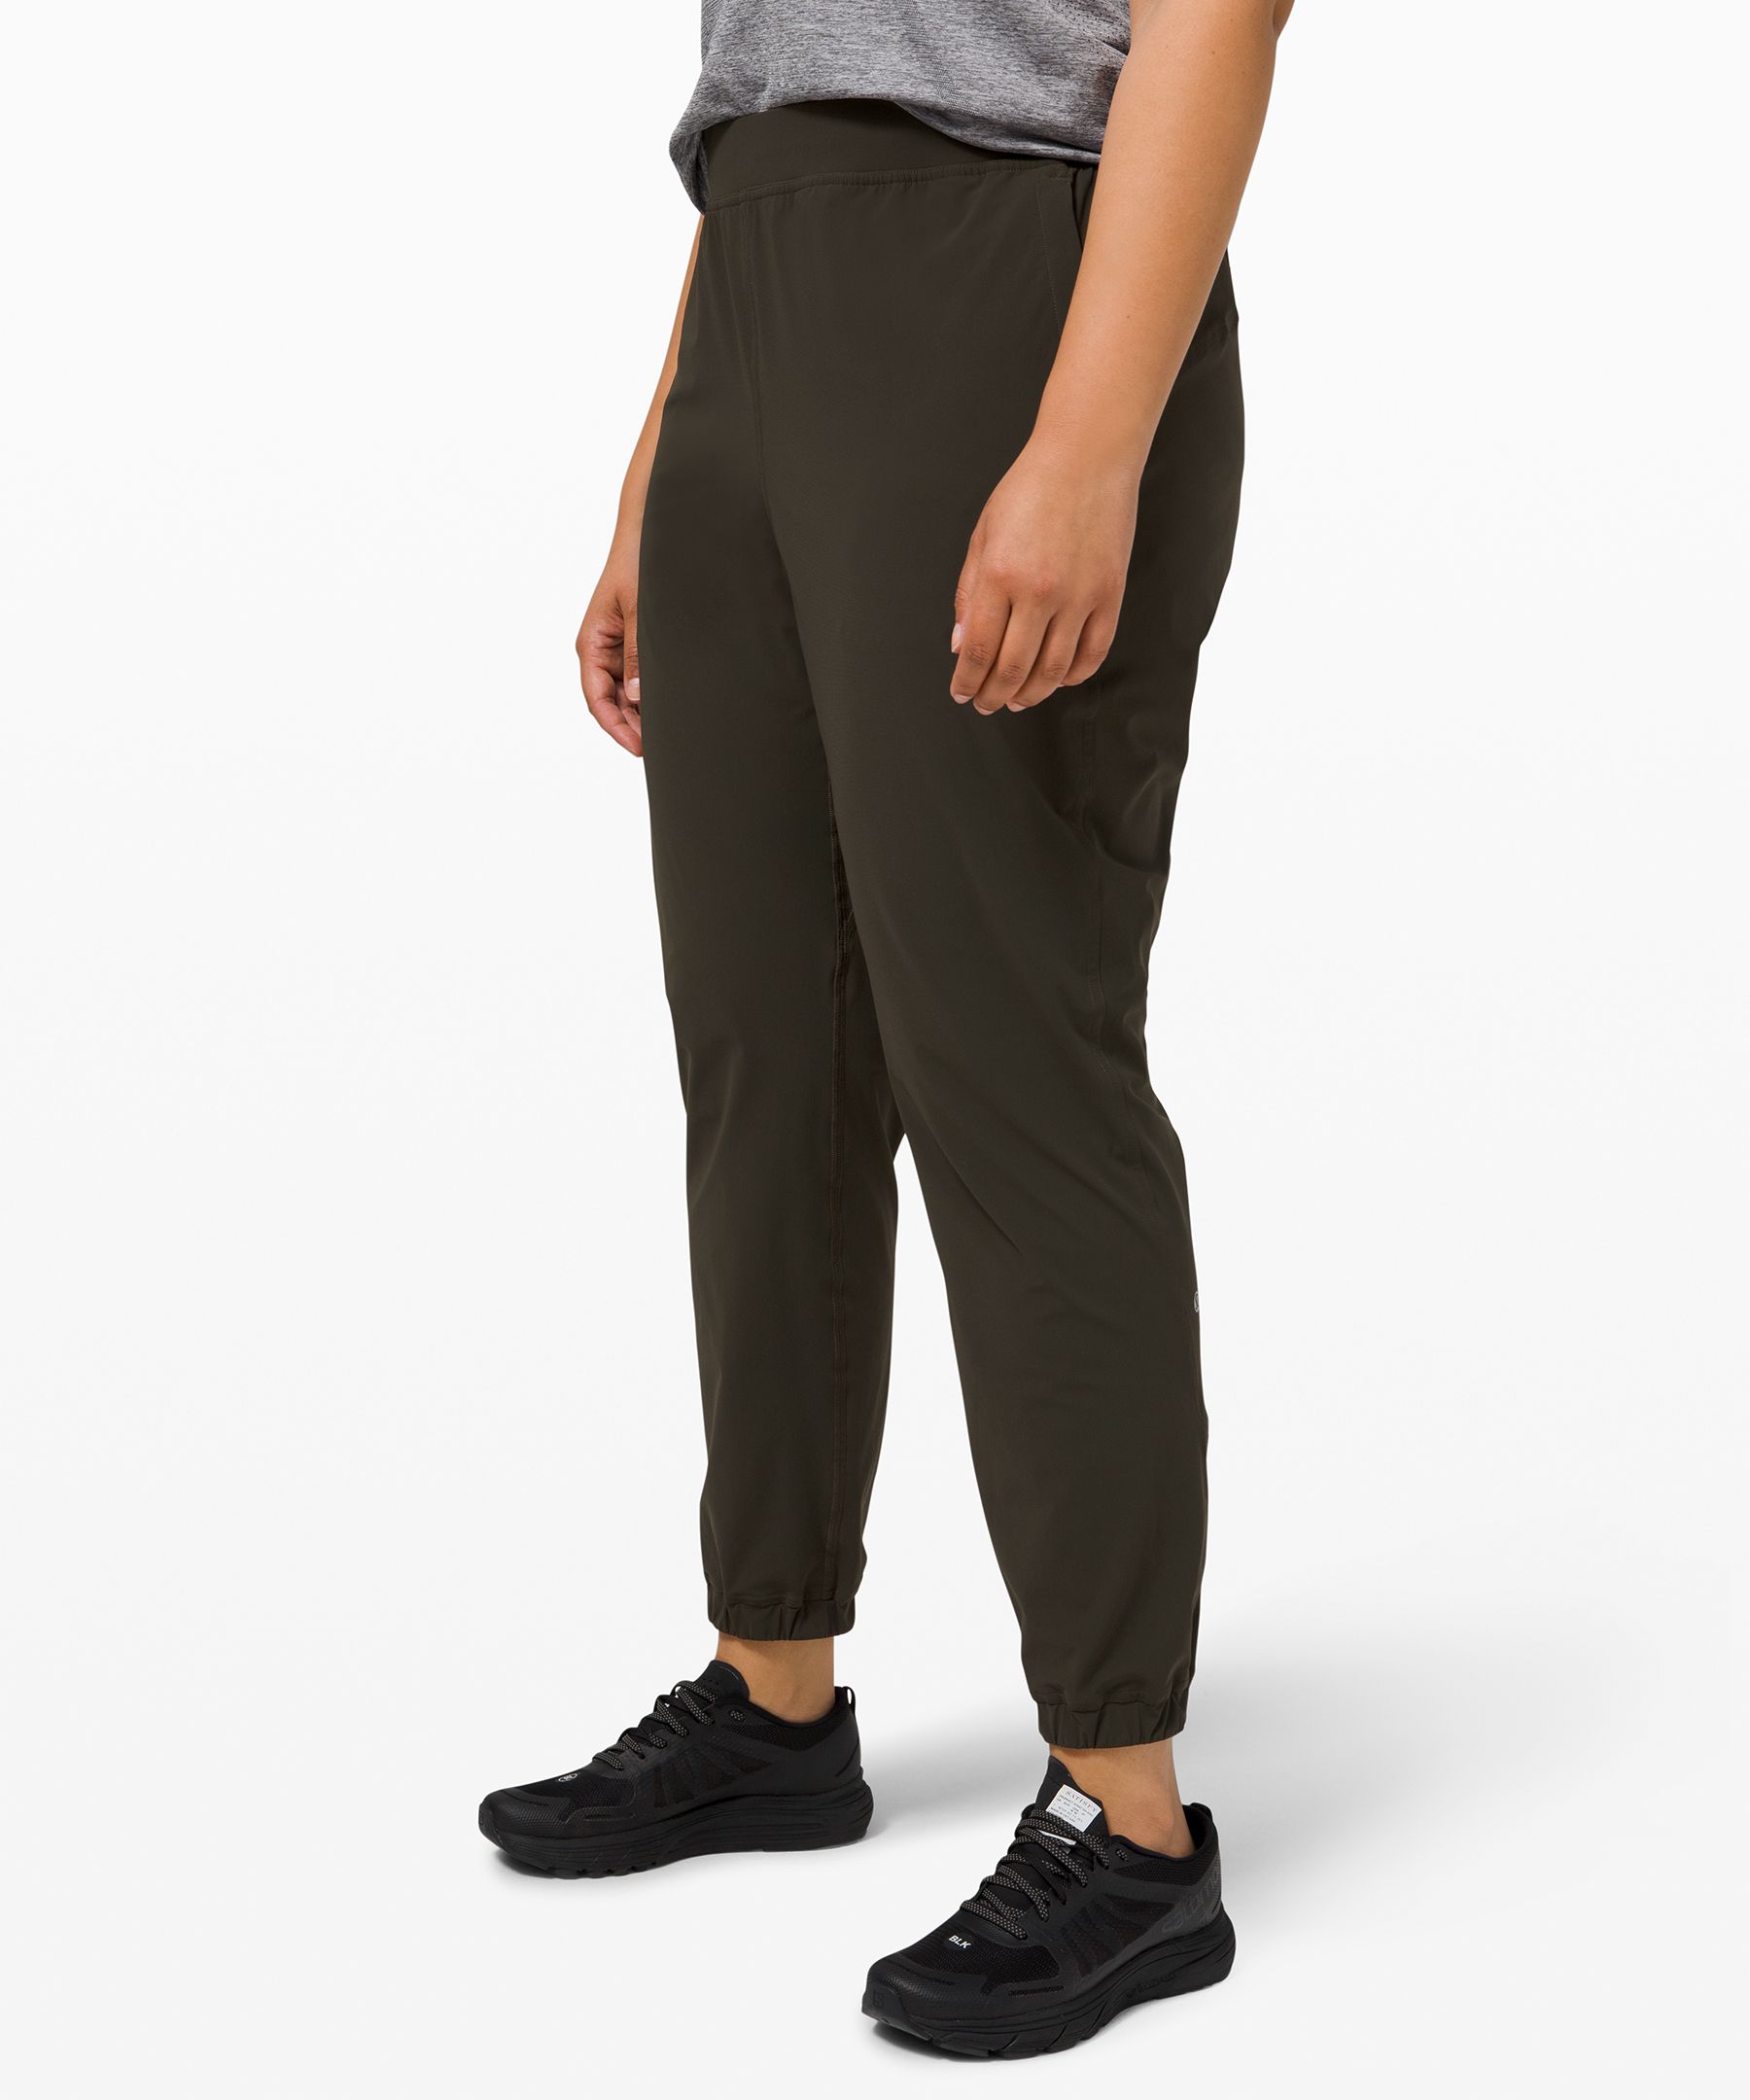 Lululemon Adapted State High-rise Joggers 28" In Dark Olive